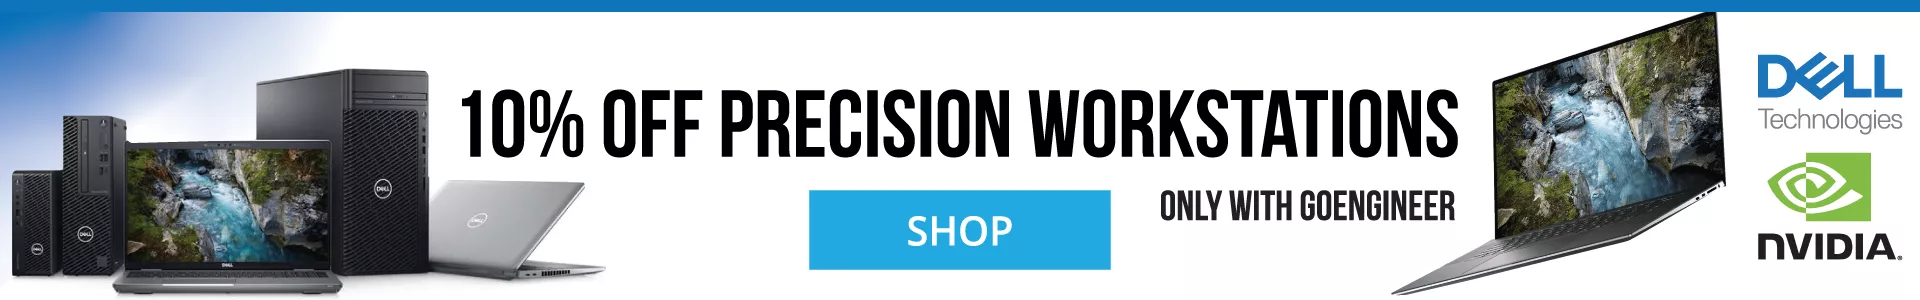 Get 10% Off Dell Precision Workstations with GoEngineer